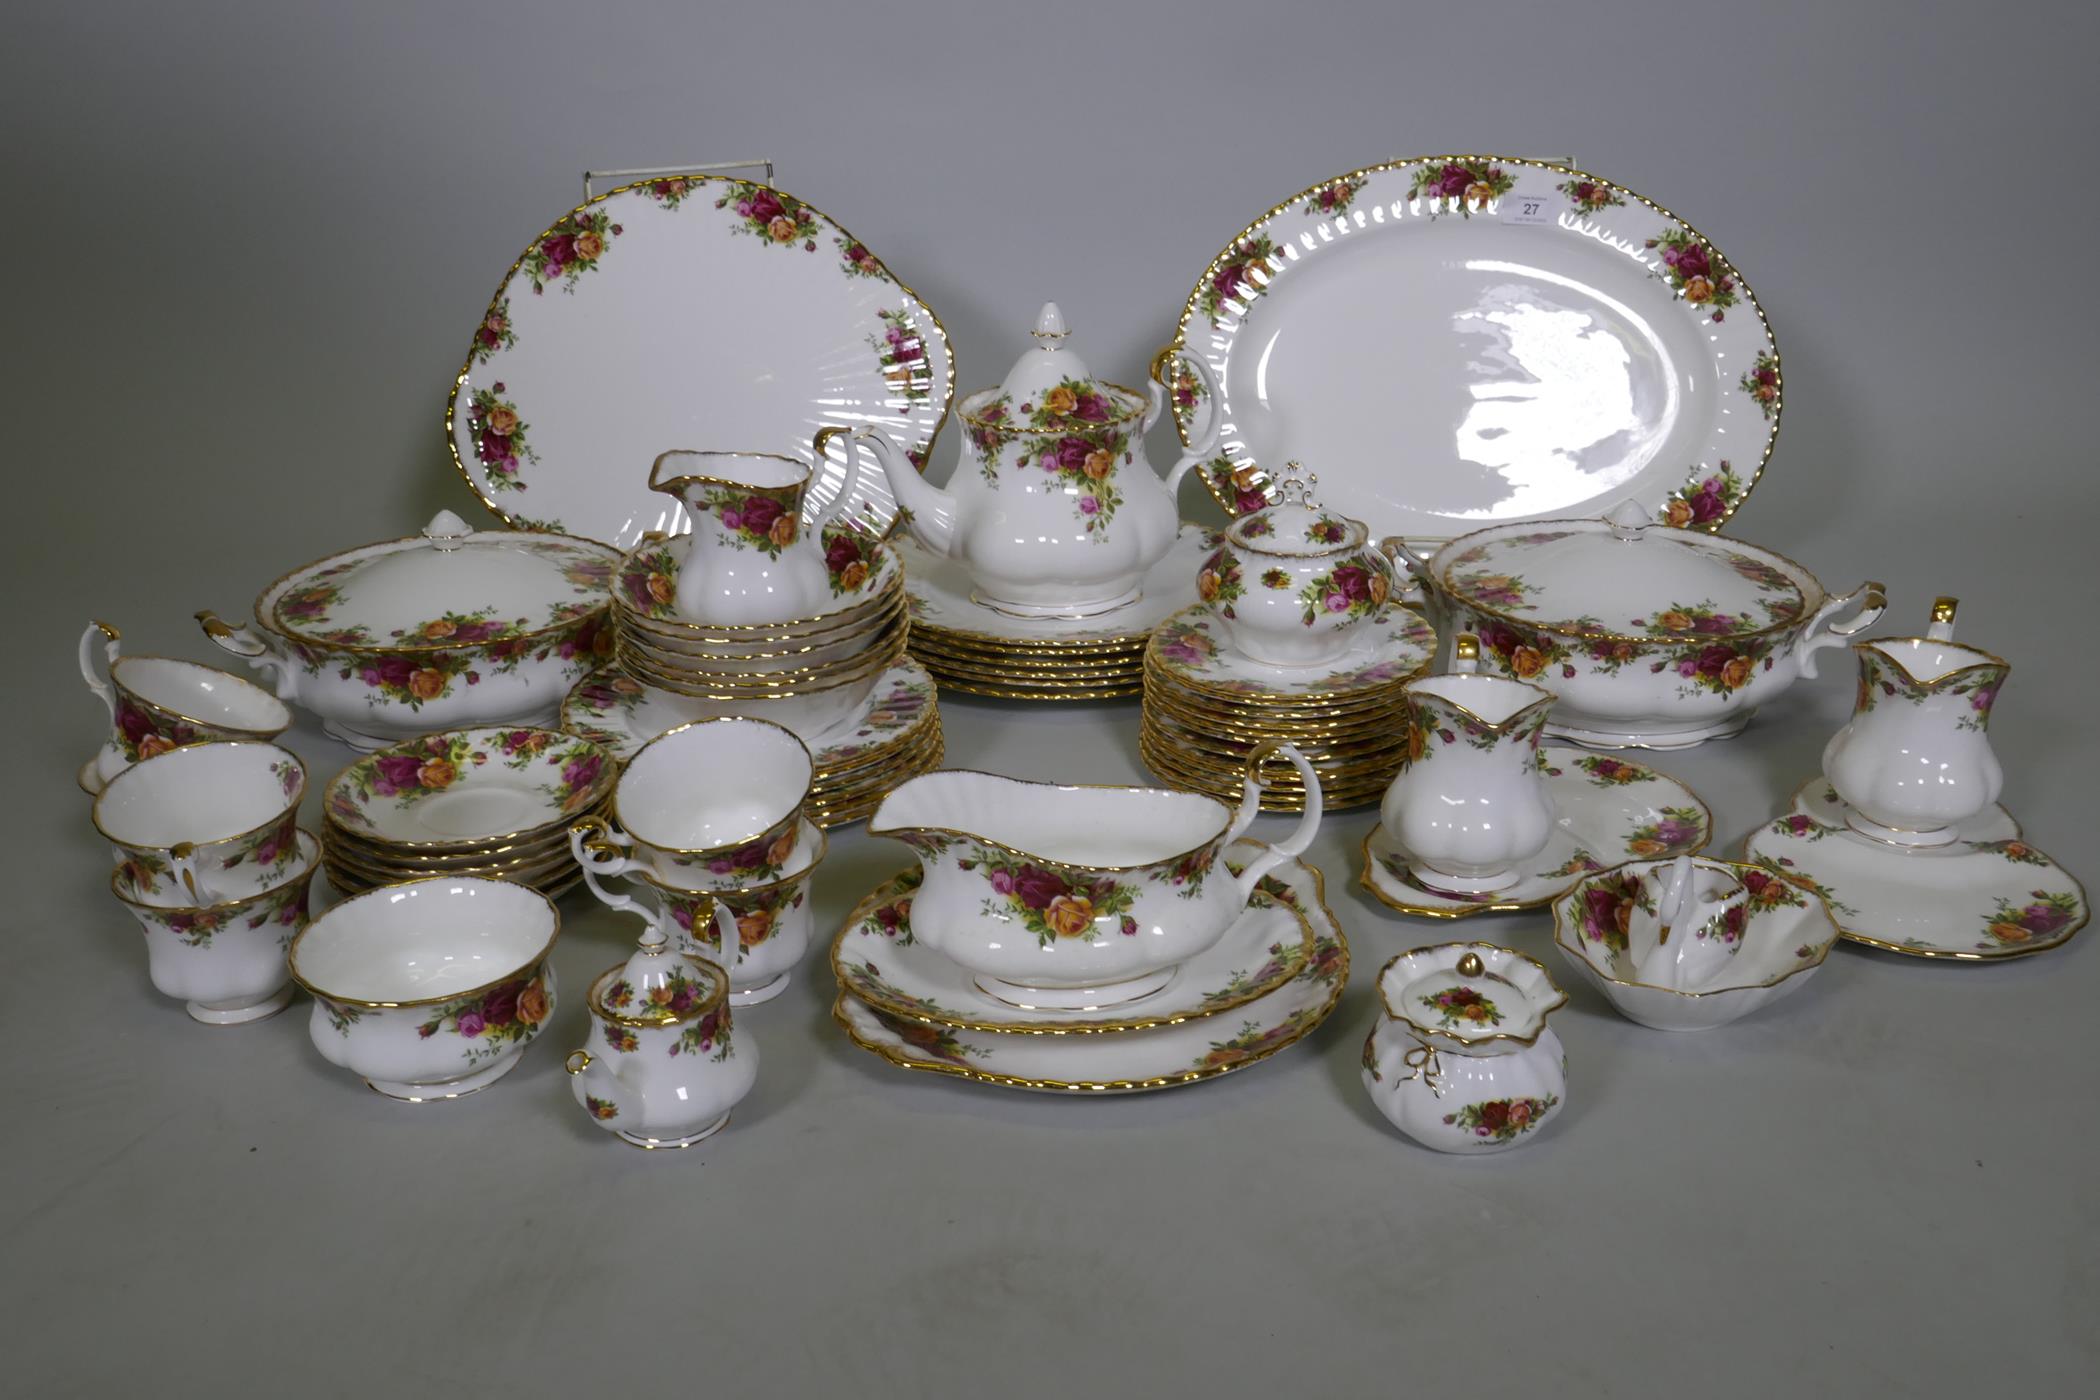 A Royal Albert Country Rose six place dinner service, with serving plates, tureens etc, appears